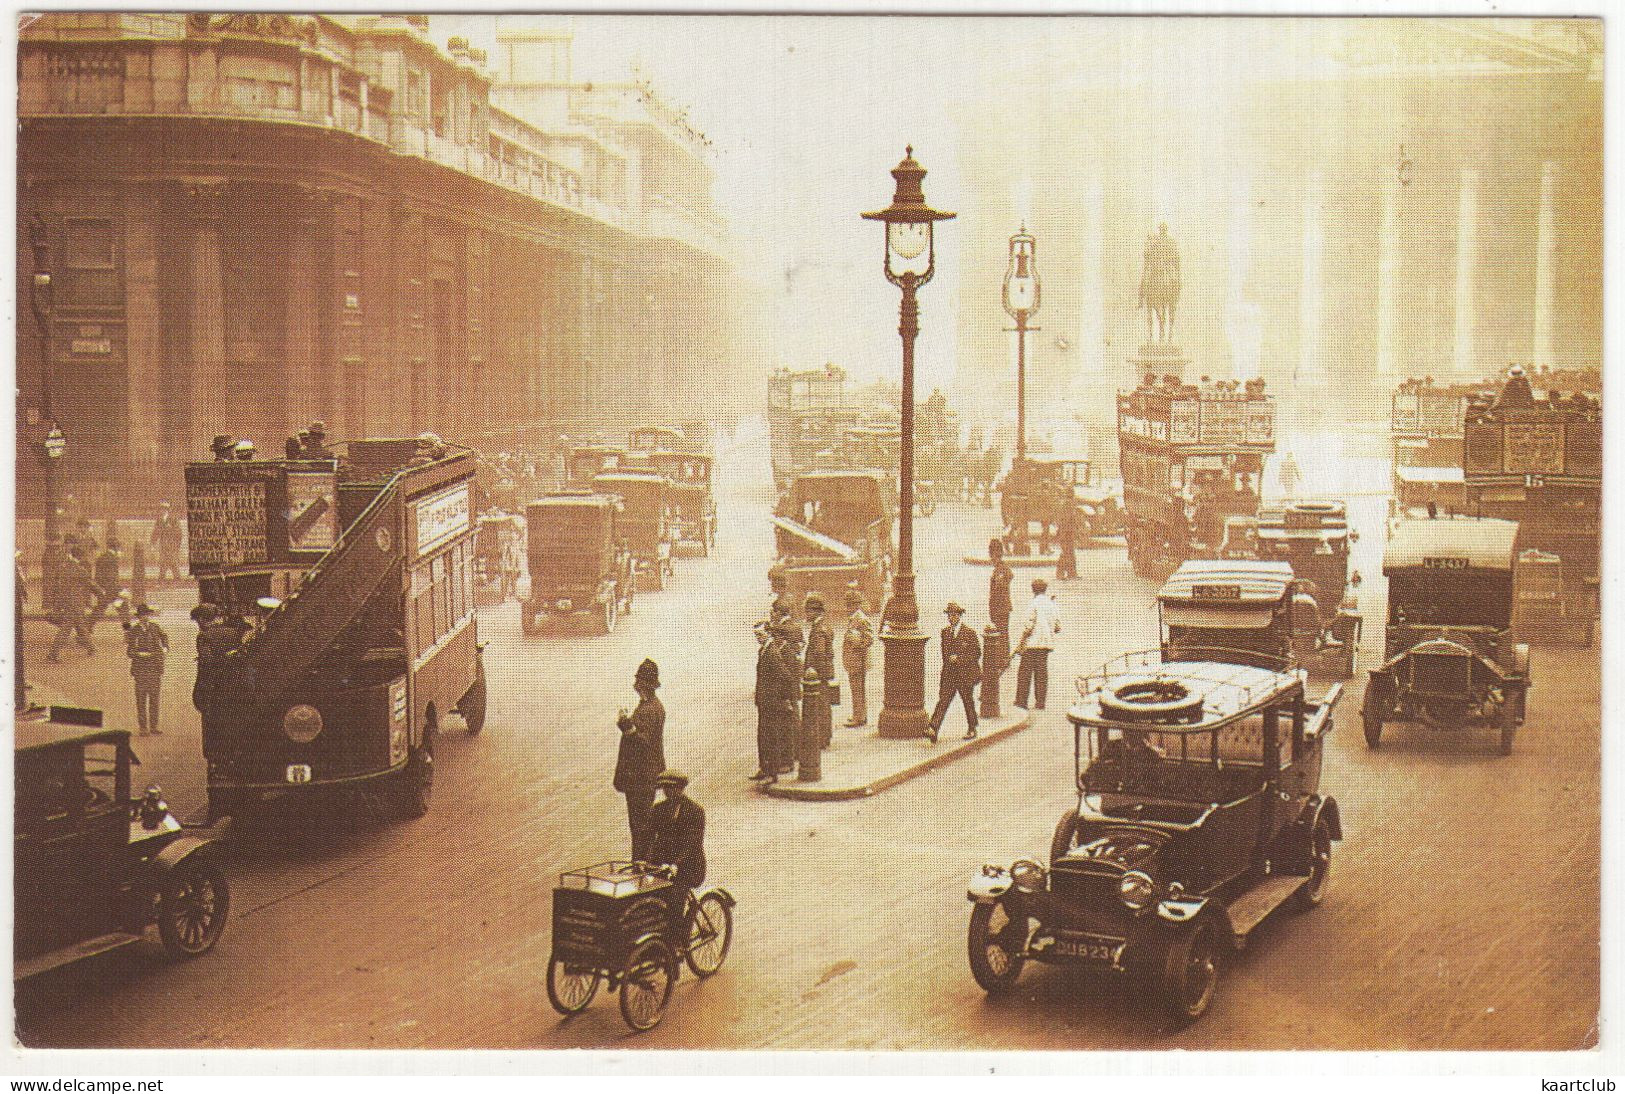 London, June 1922 - VINTAGE CARS, FREIGHT BICYCLE, DOUBLE DECKER BUS, TAXI CABS - Royal Exchange - (England) - PKW